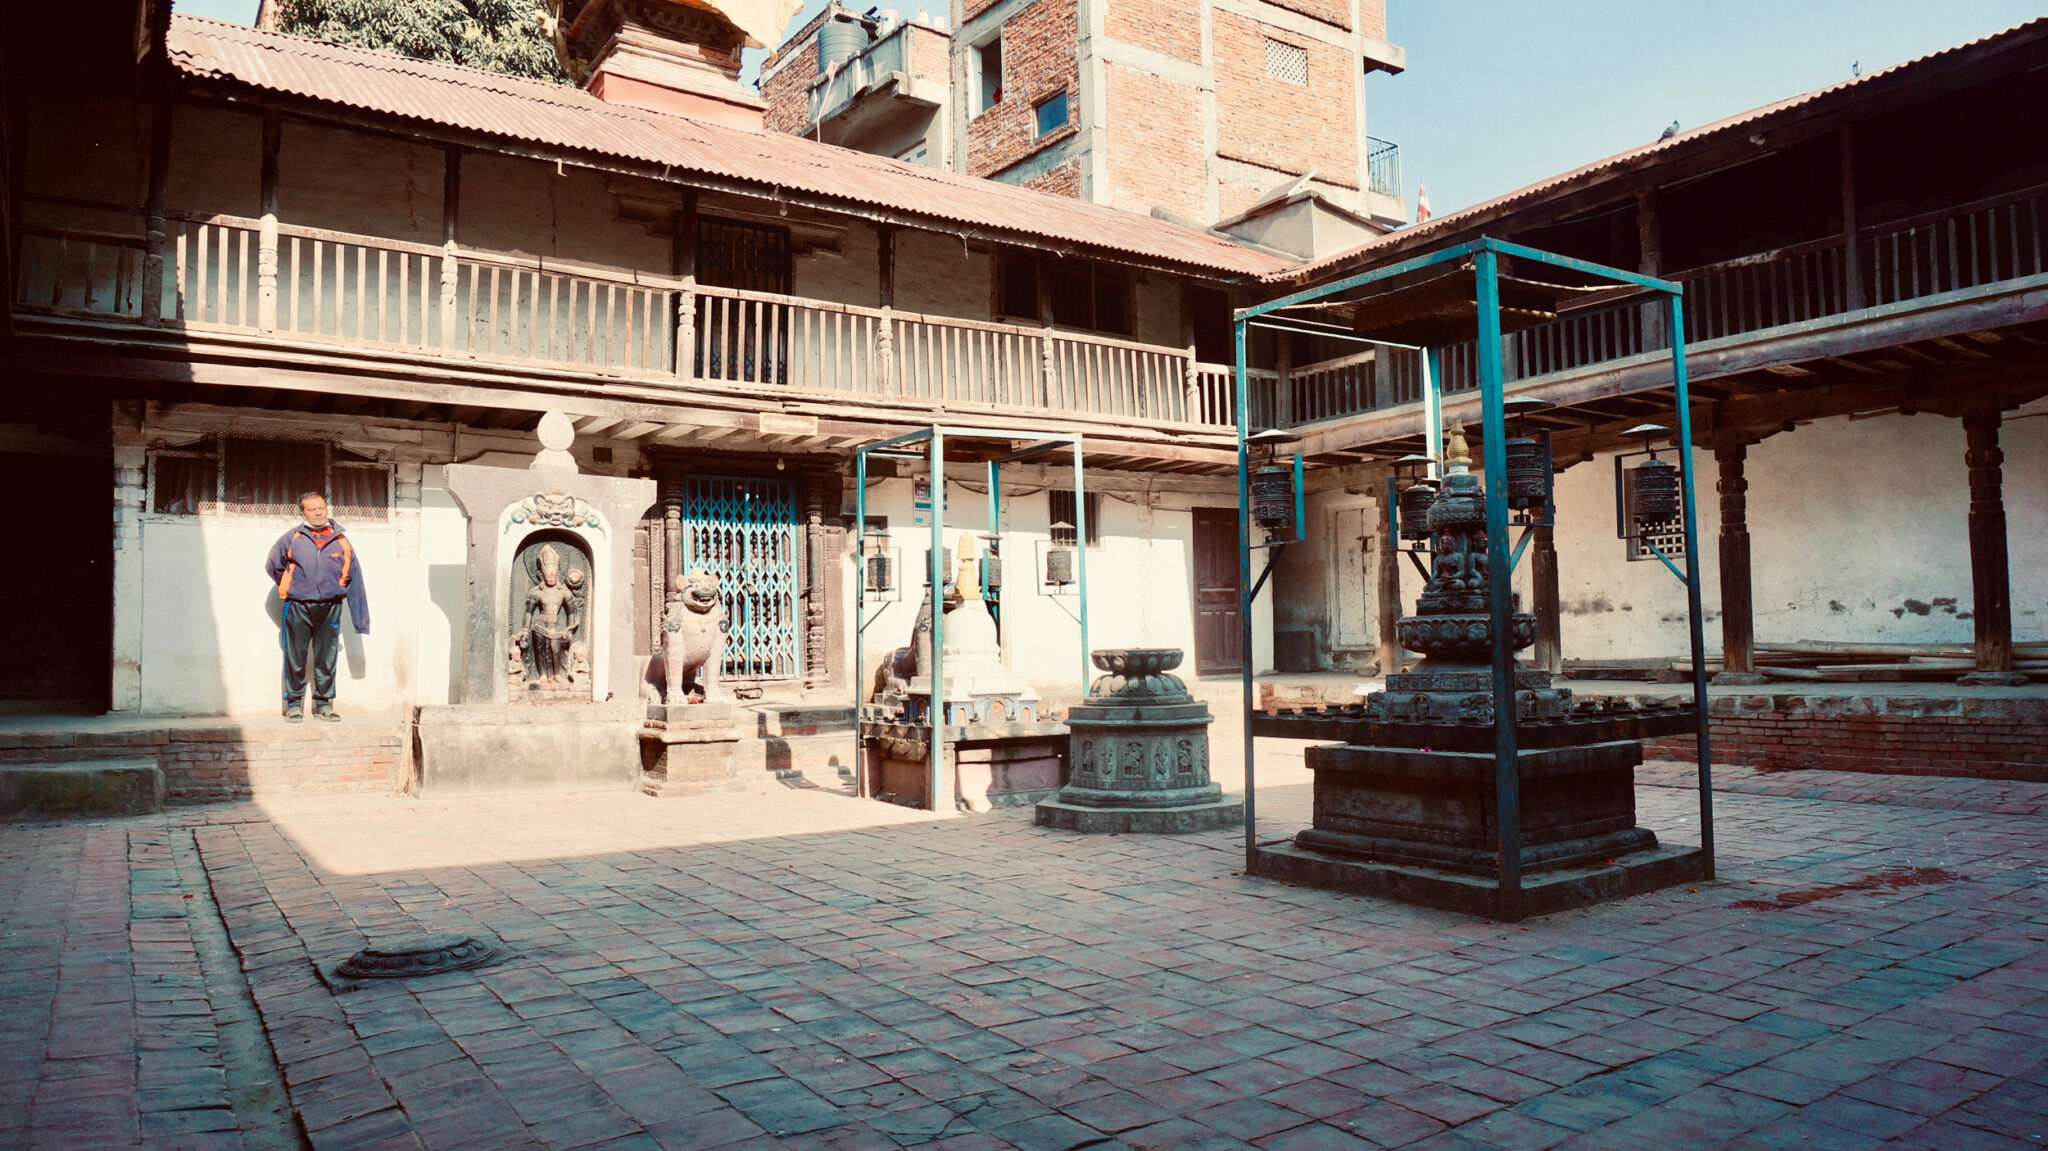 Courtyard featuring second-story loggia under sloping roofline; religious sculptures and implements at center of courtyard